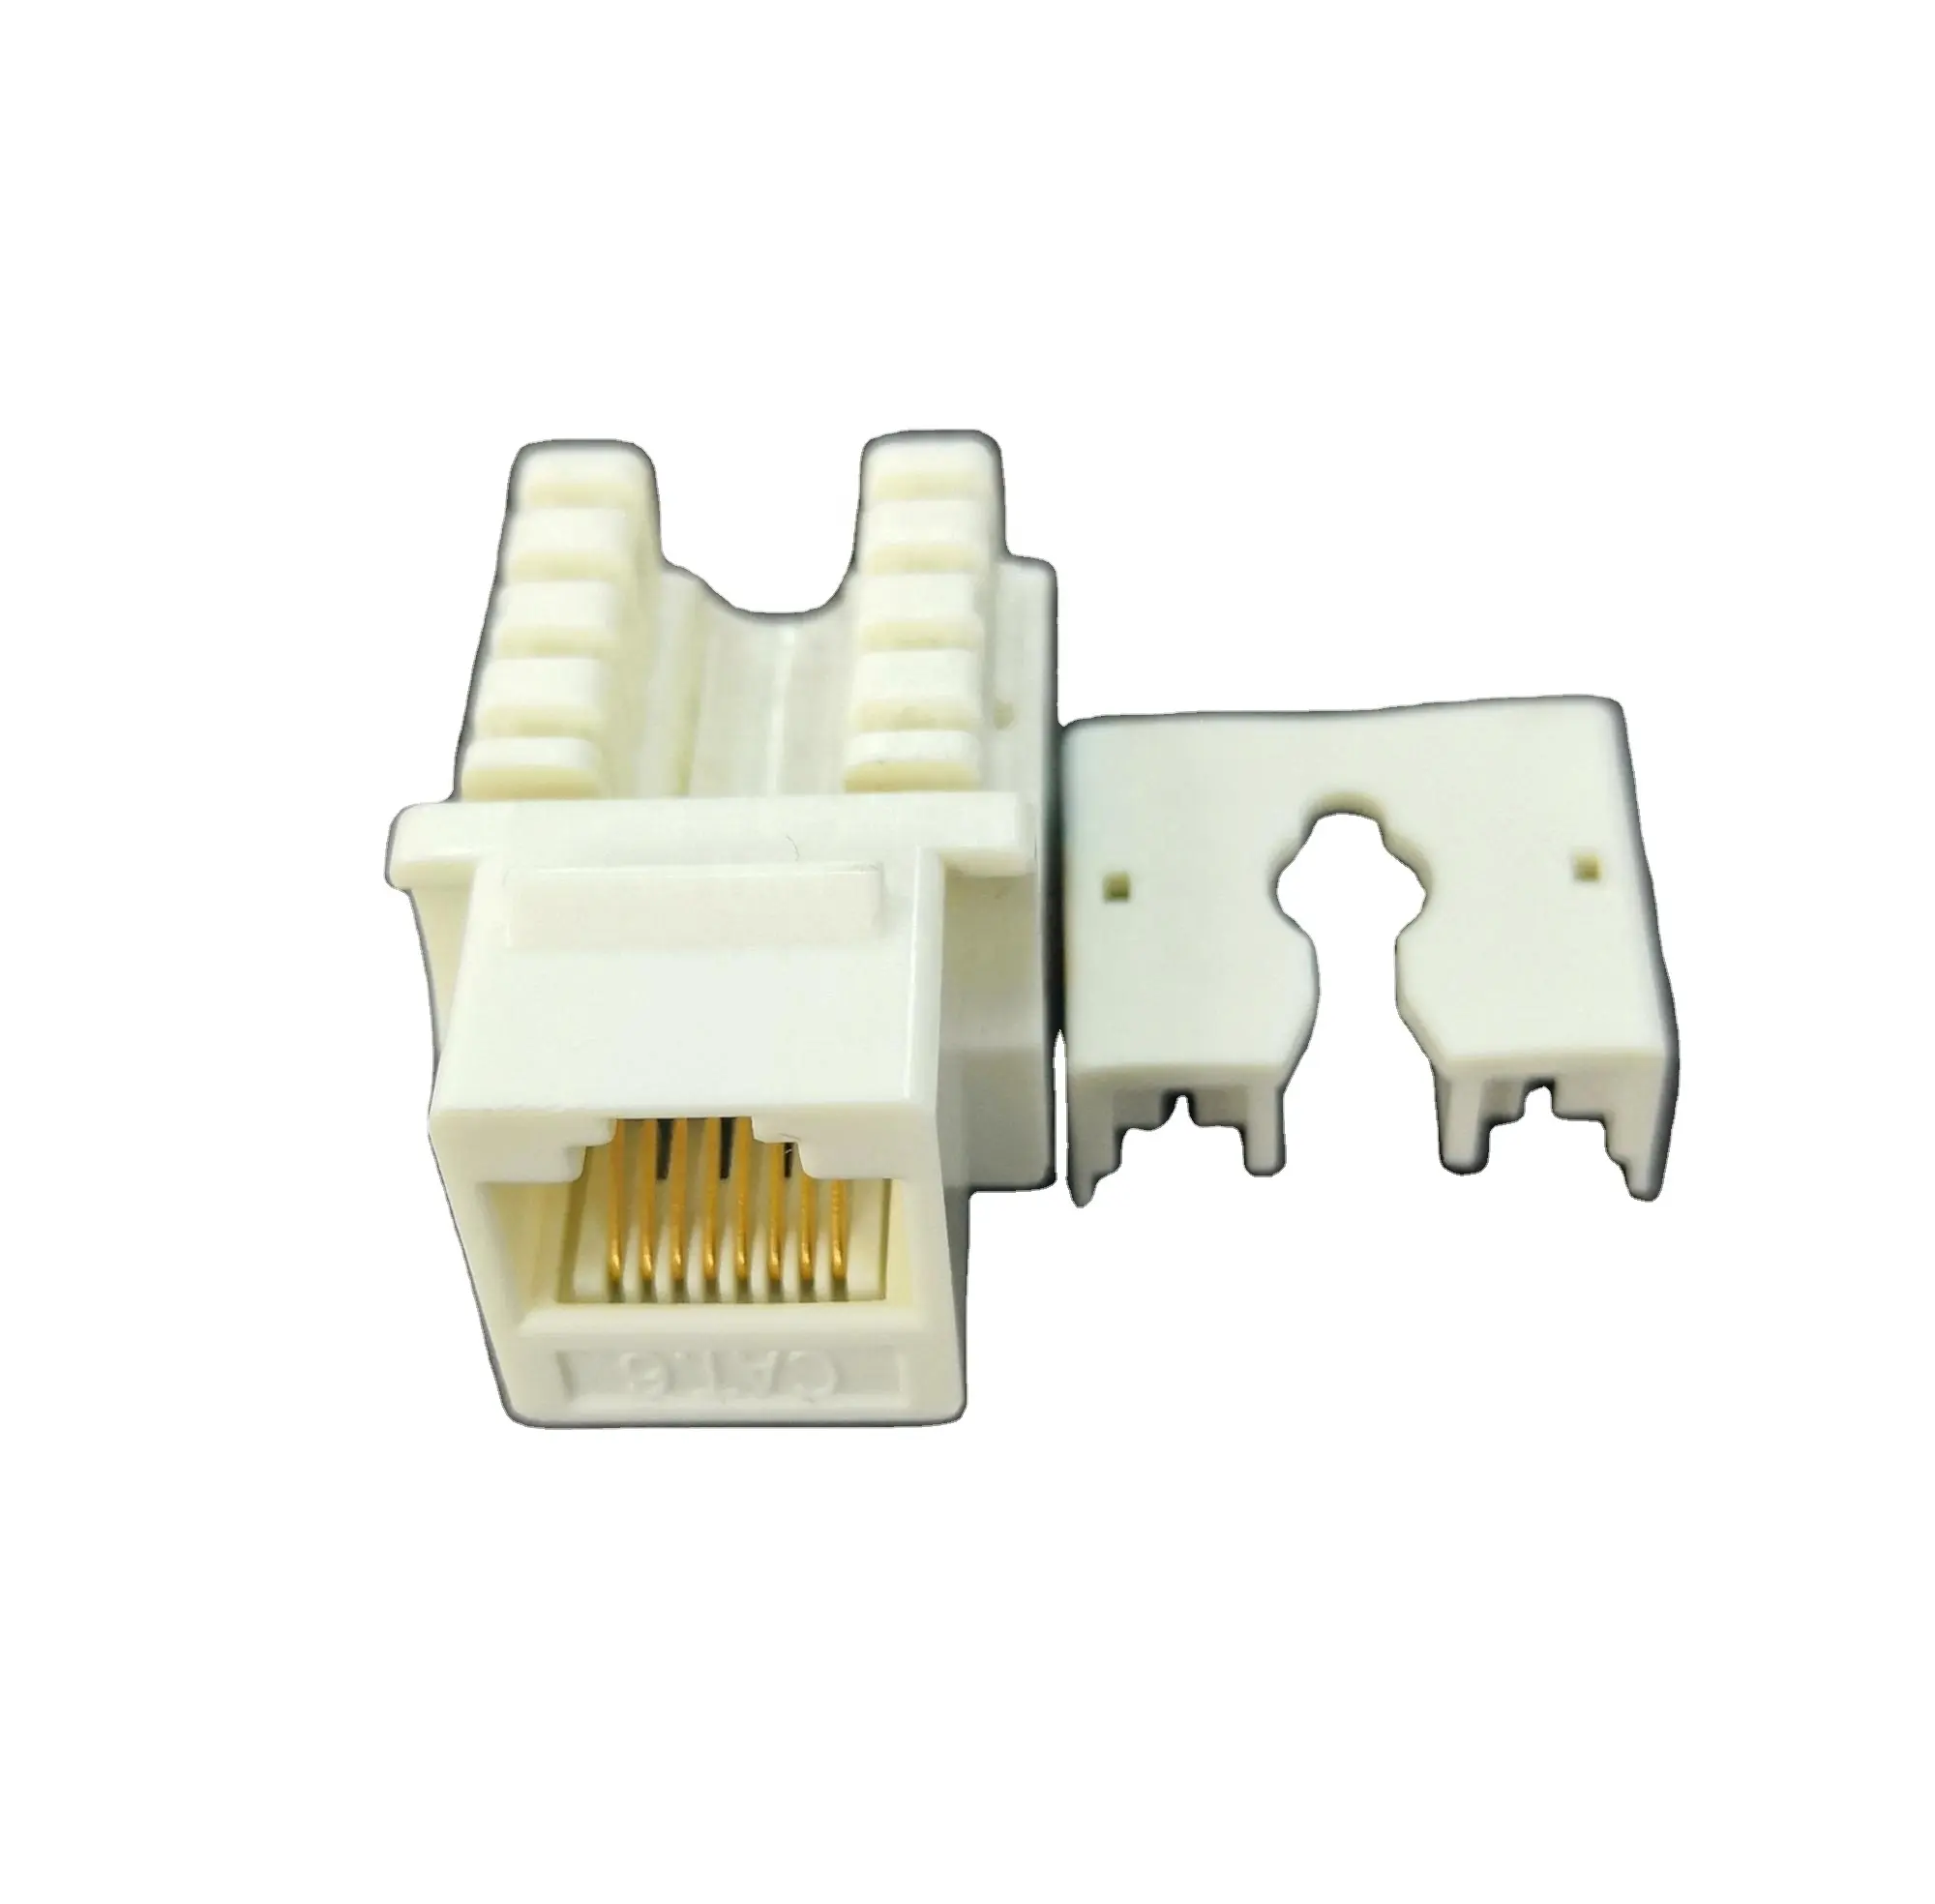 cat6 cat6a utp 180 degree toolless keystone jack for 24 ports patch panel & faceplate